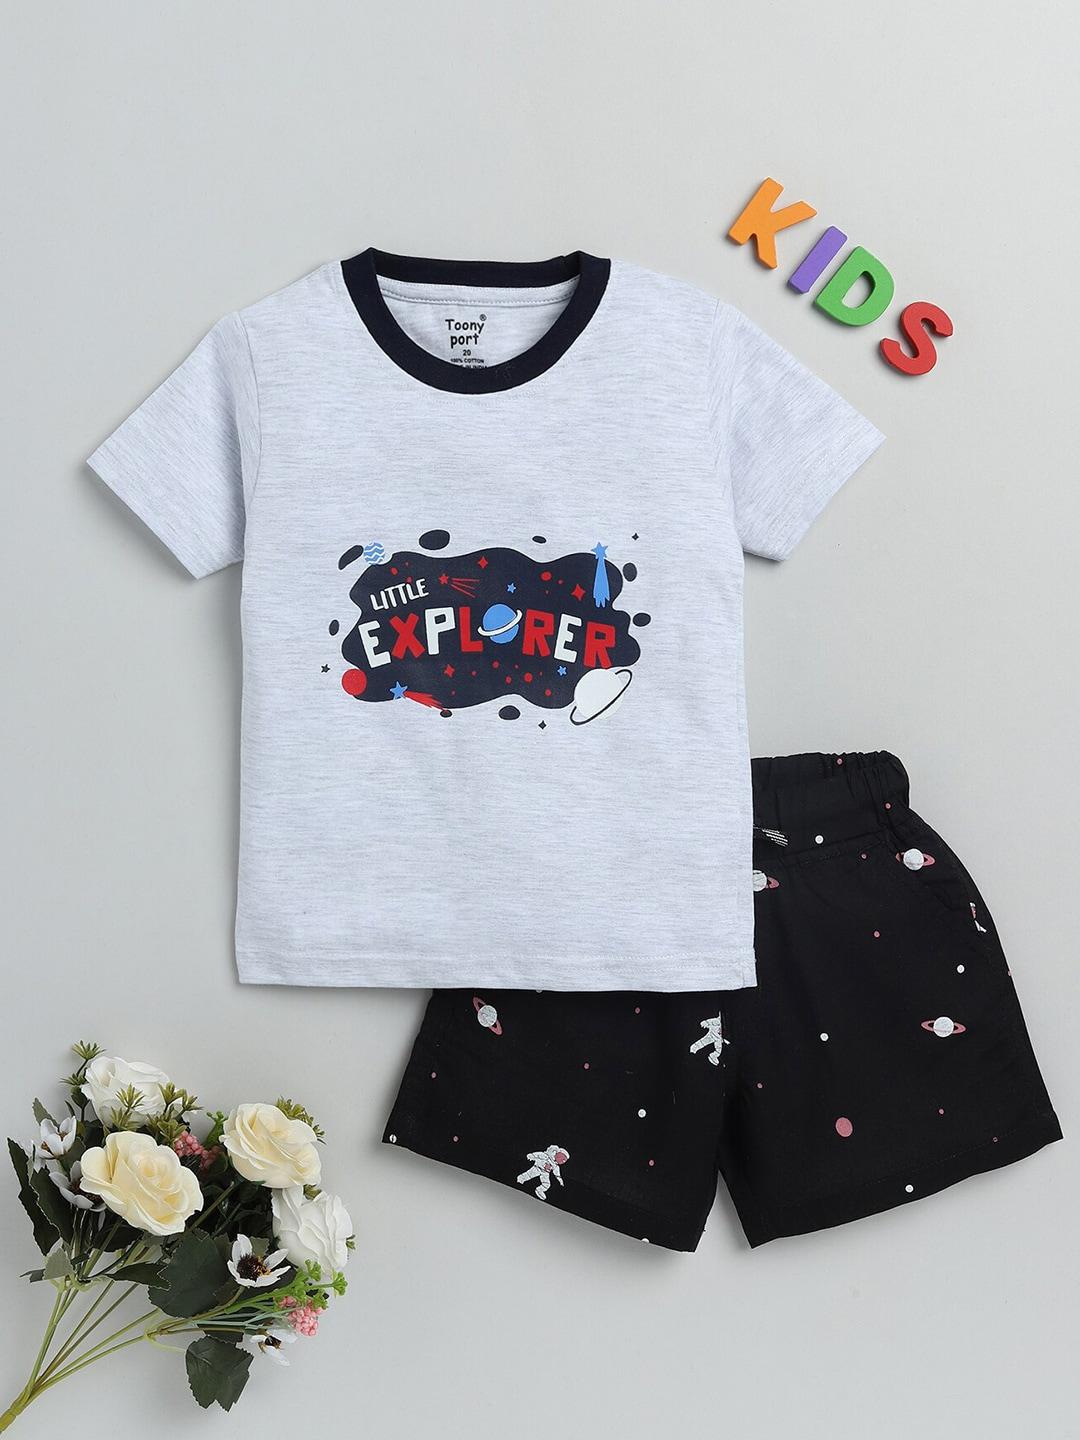 Toonyport Boys Typography Printed Round Neck Cotton Clothing Sets